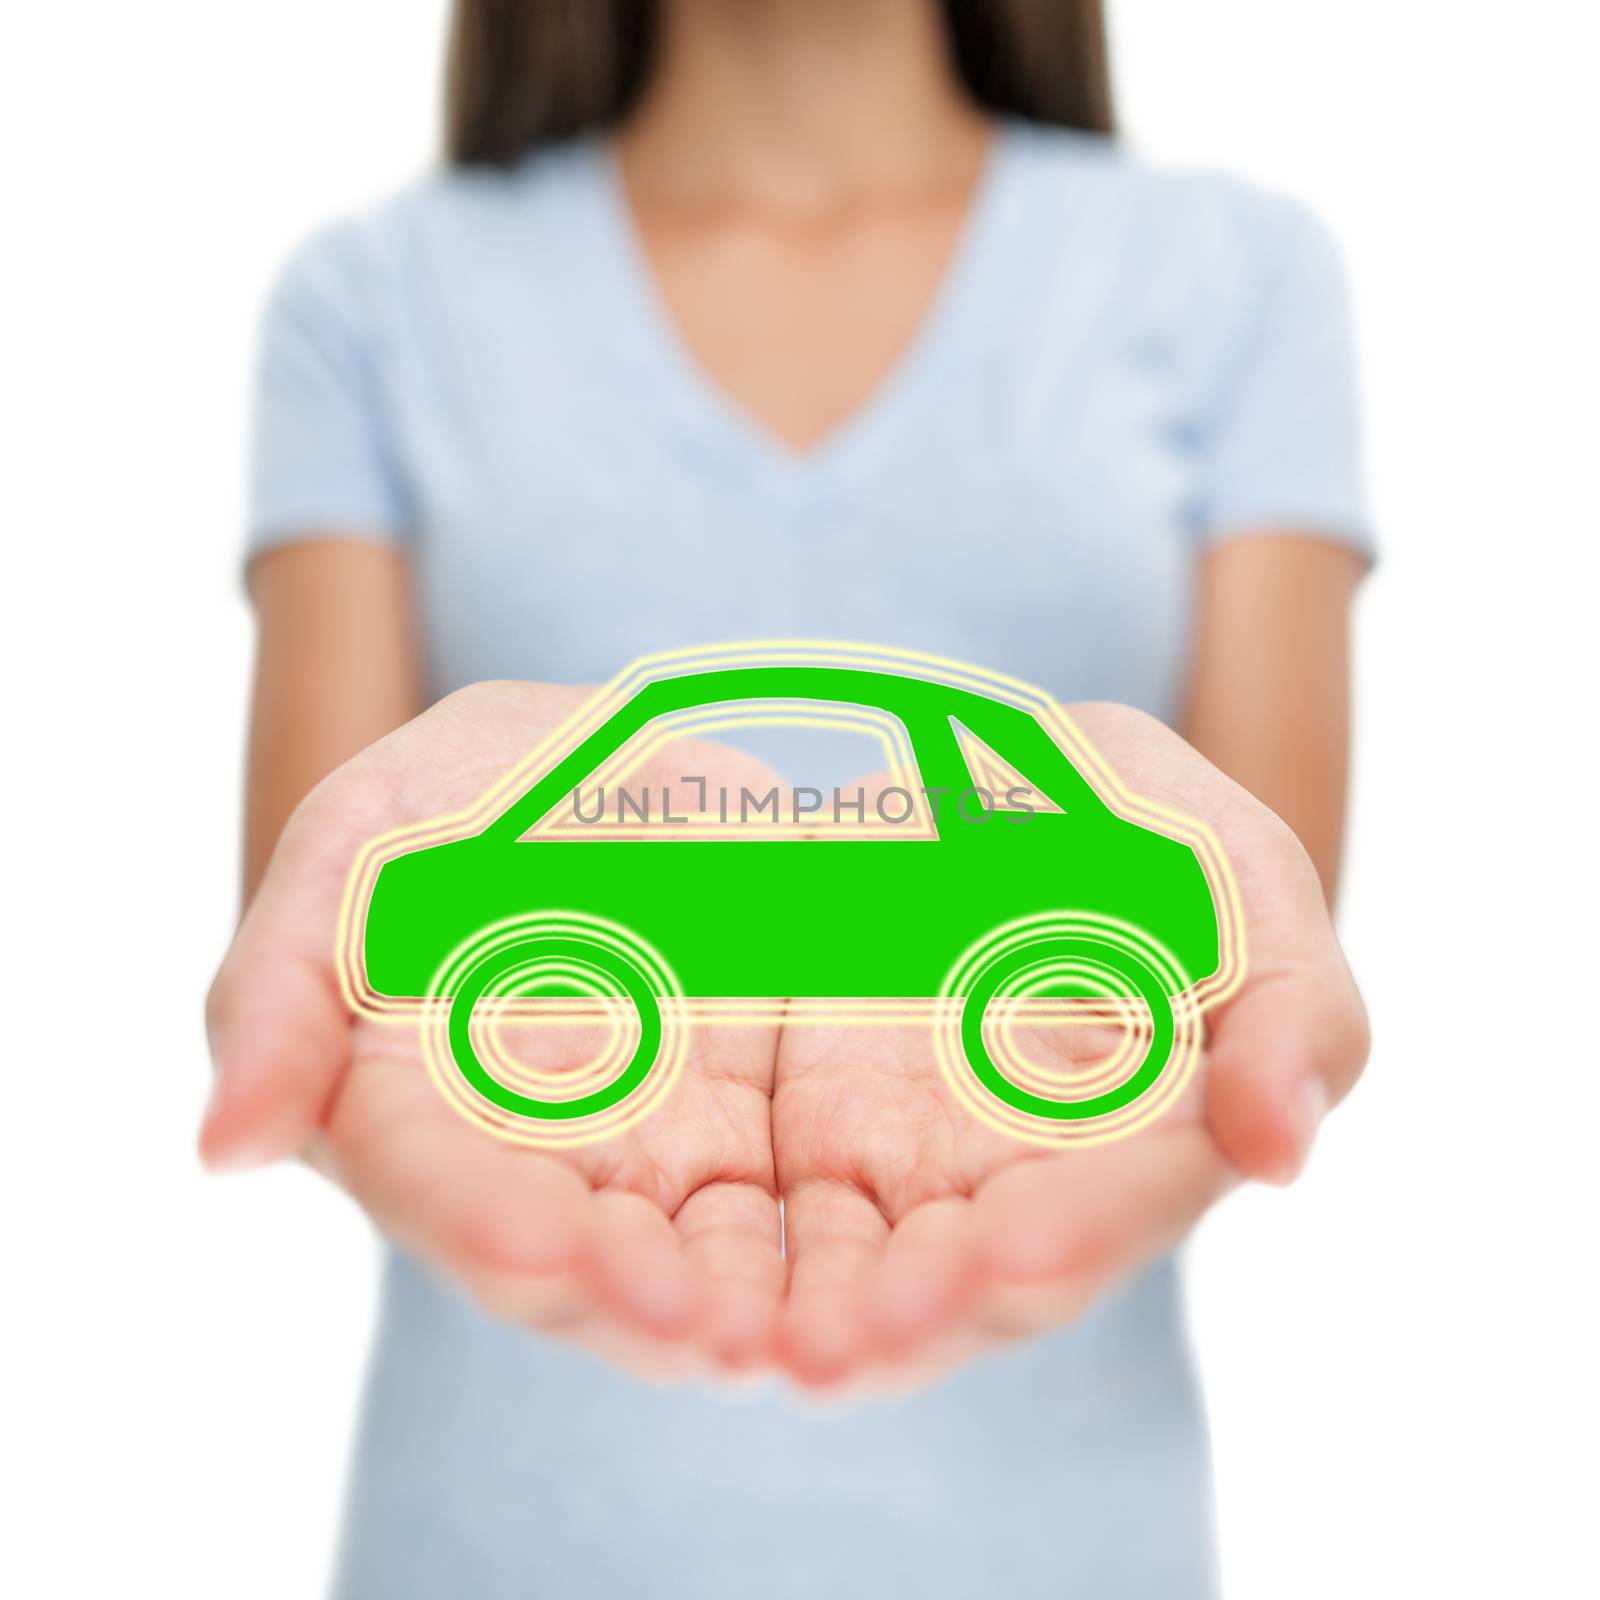 Green car insurance woman showing open hands. Eco friendly environment electric hybrid auto insurance concept by Maridav